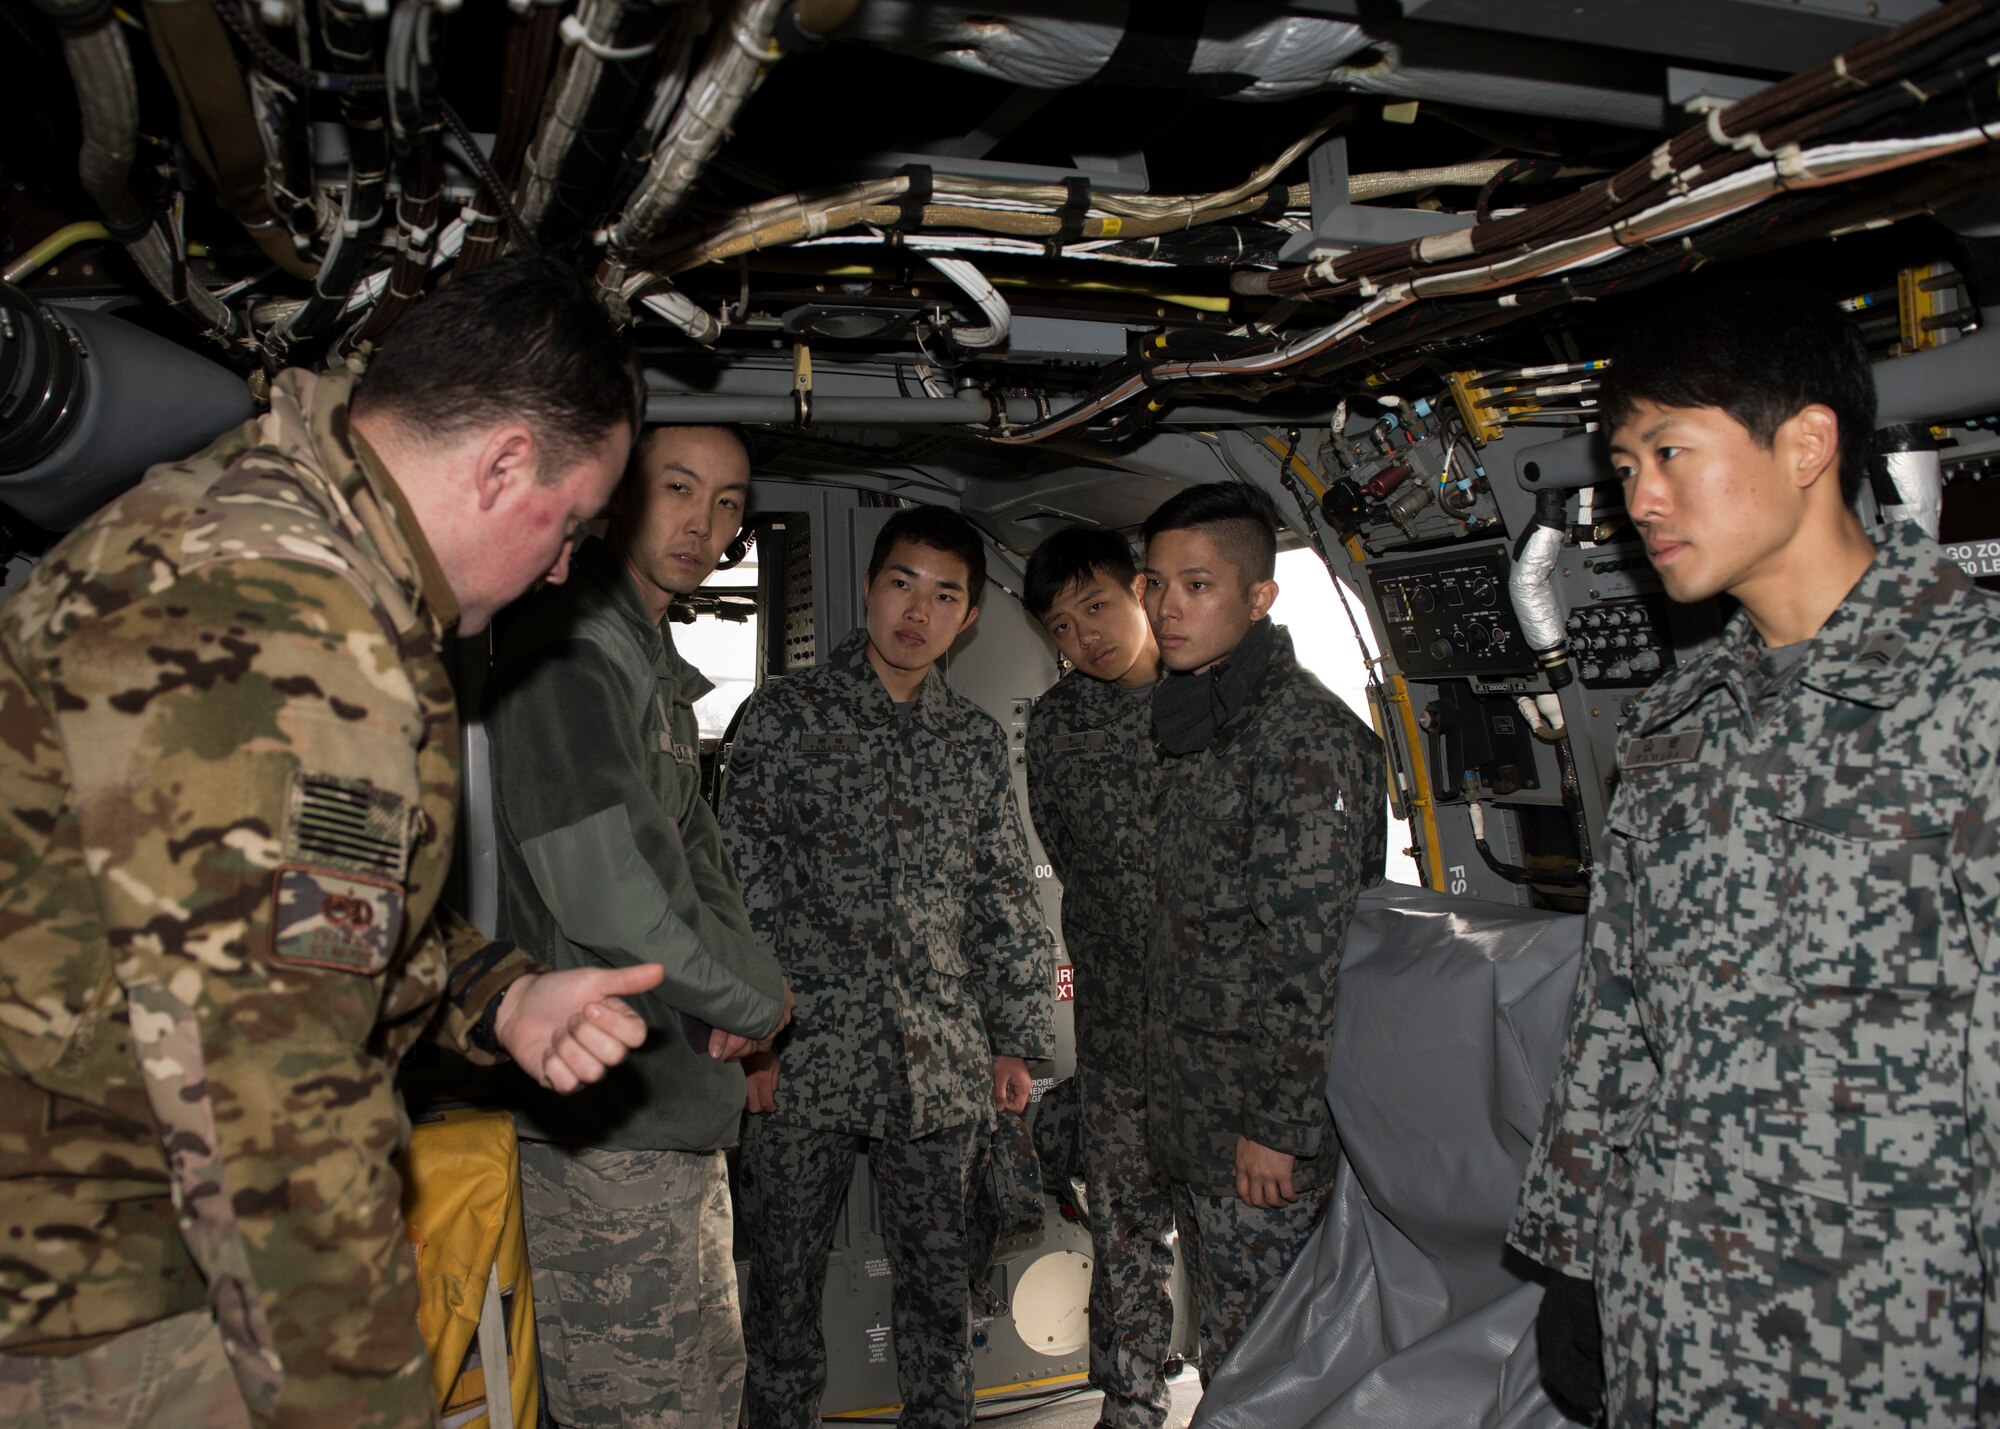 Tech. Sgt. Daniel Moxley, 753th Special Operations Aircraft Maintenance Squadron crew chief, gives a CV-22 Osprey brief to Japan Air Self-Defense Force members, assigned to the Iruma Air Base, during a tour at Yokota Air Base, Japan, Feb.12, 2020.